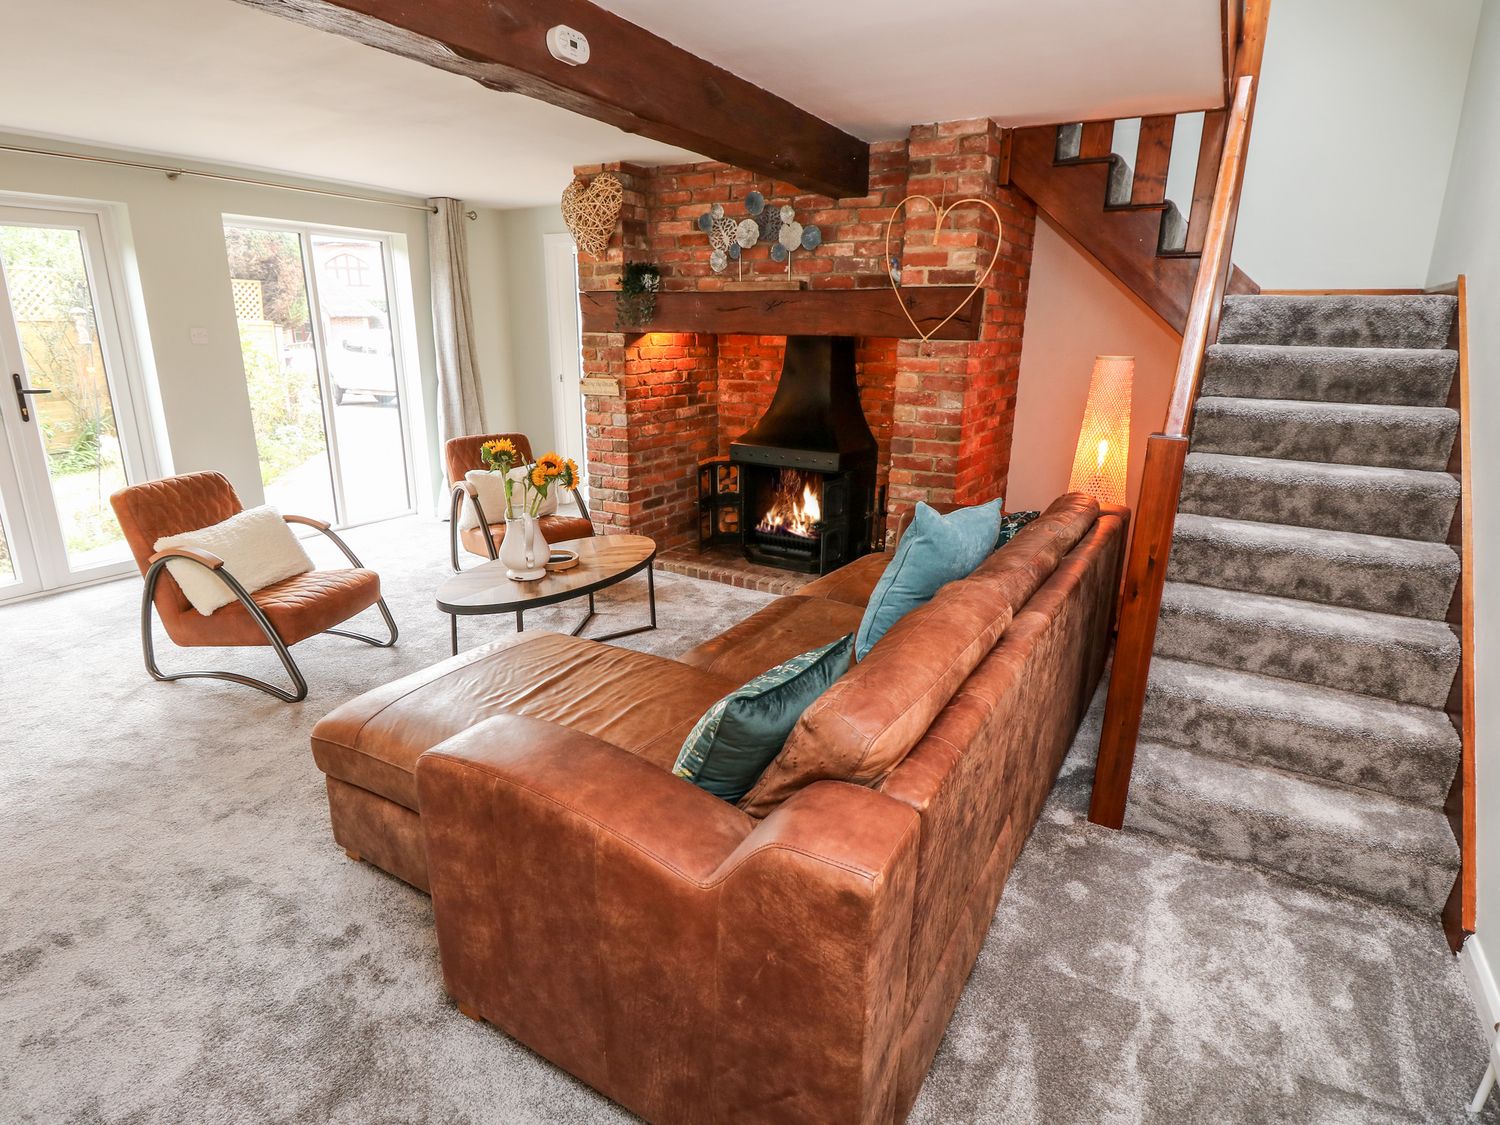 Northern Byre rests in Sopley, Hampshire. Four-bedroom barn conversion, resting near amenities. Pets